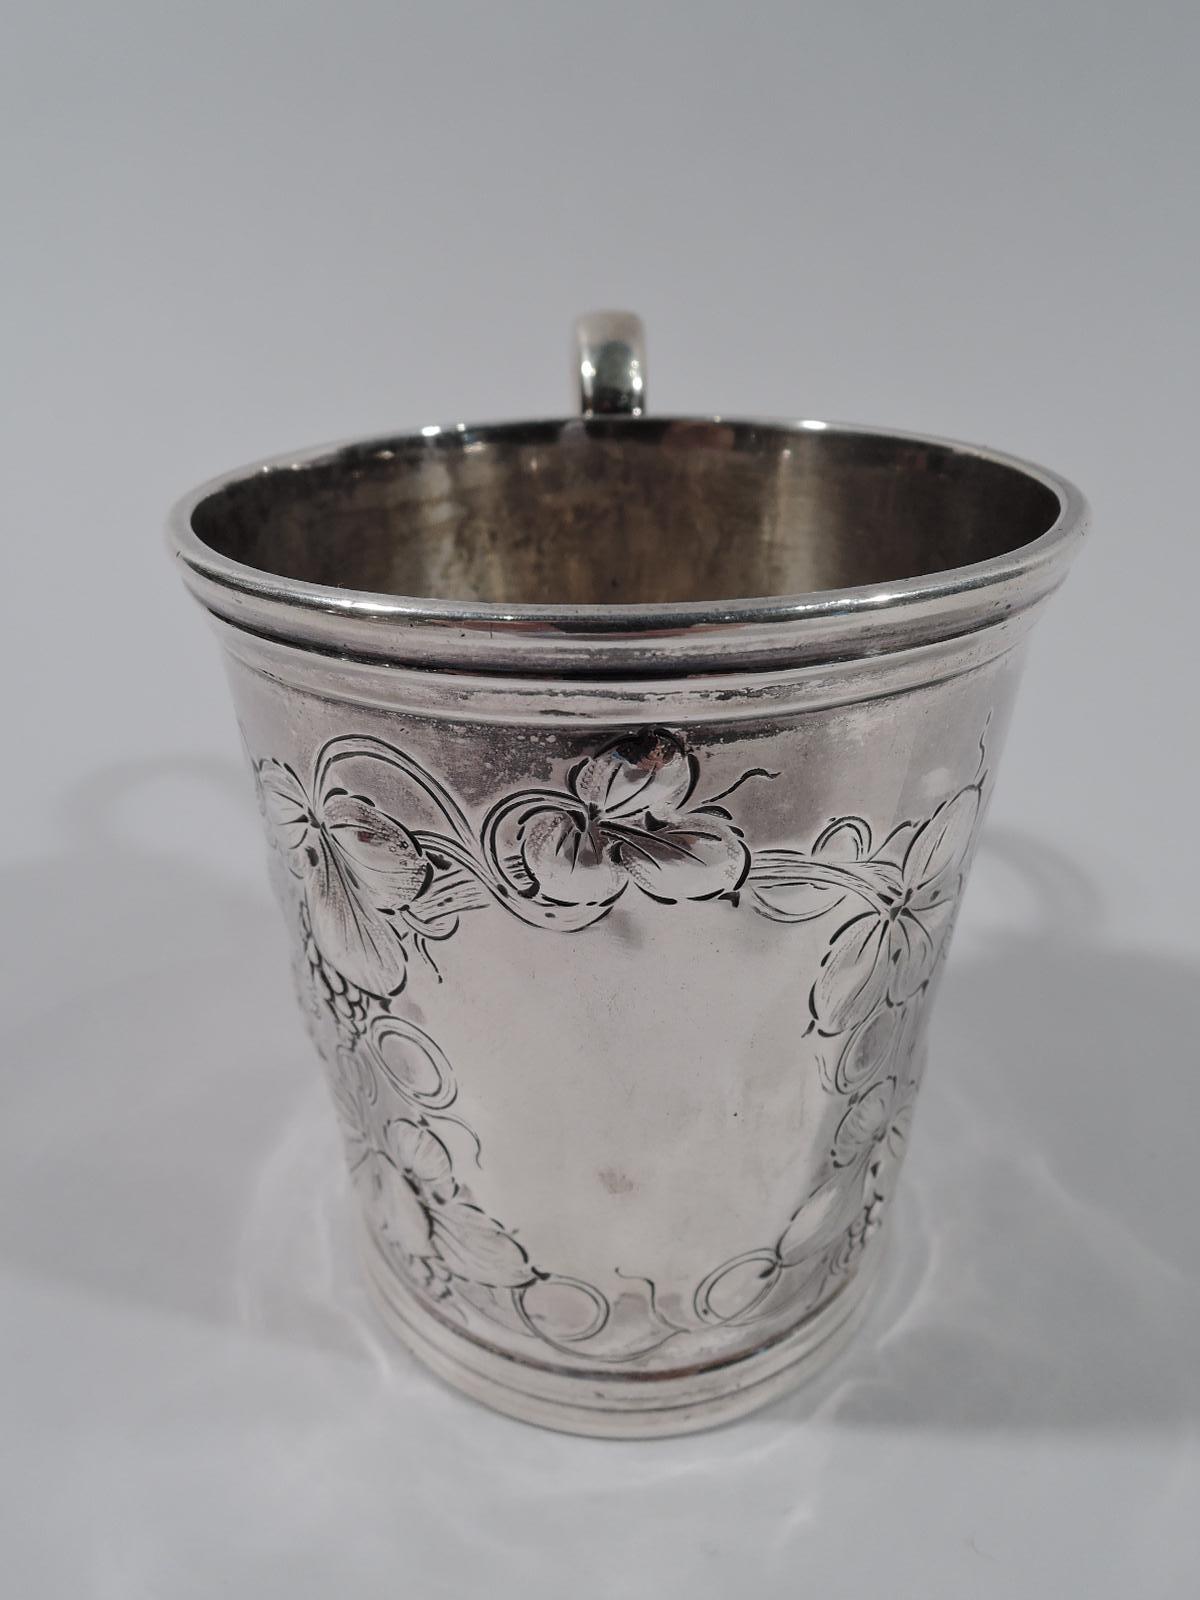 American coin silver baby cup, ca 1850. Gently tapering sides with molded rim and base and high looping s-scroll handle. Ovalish frame (vacant) surrounded by a fruiting berry branch with a profusion of leaves and tendrils. Worn mark. Weight: 4.5